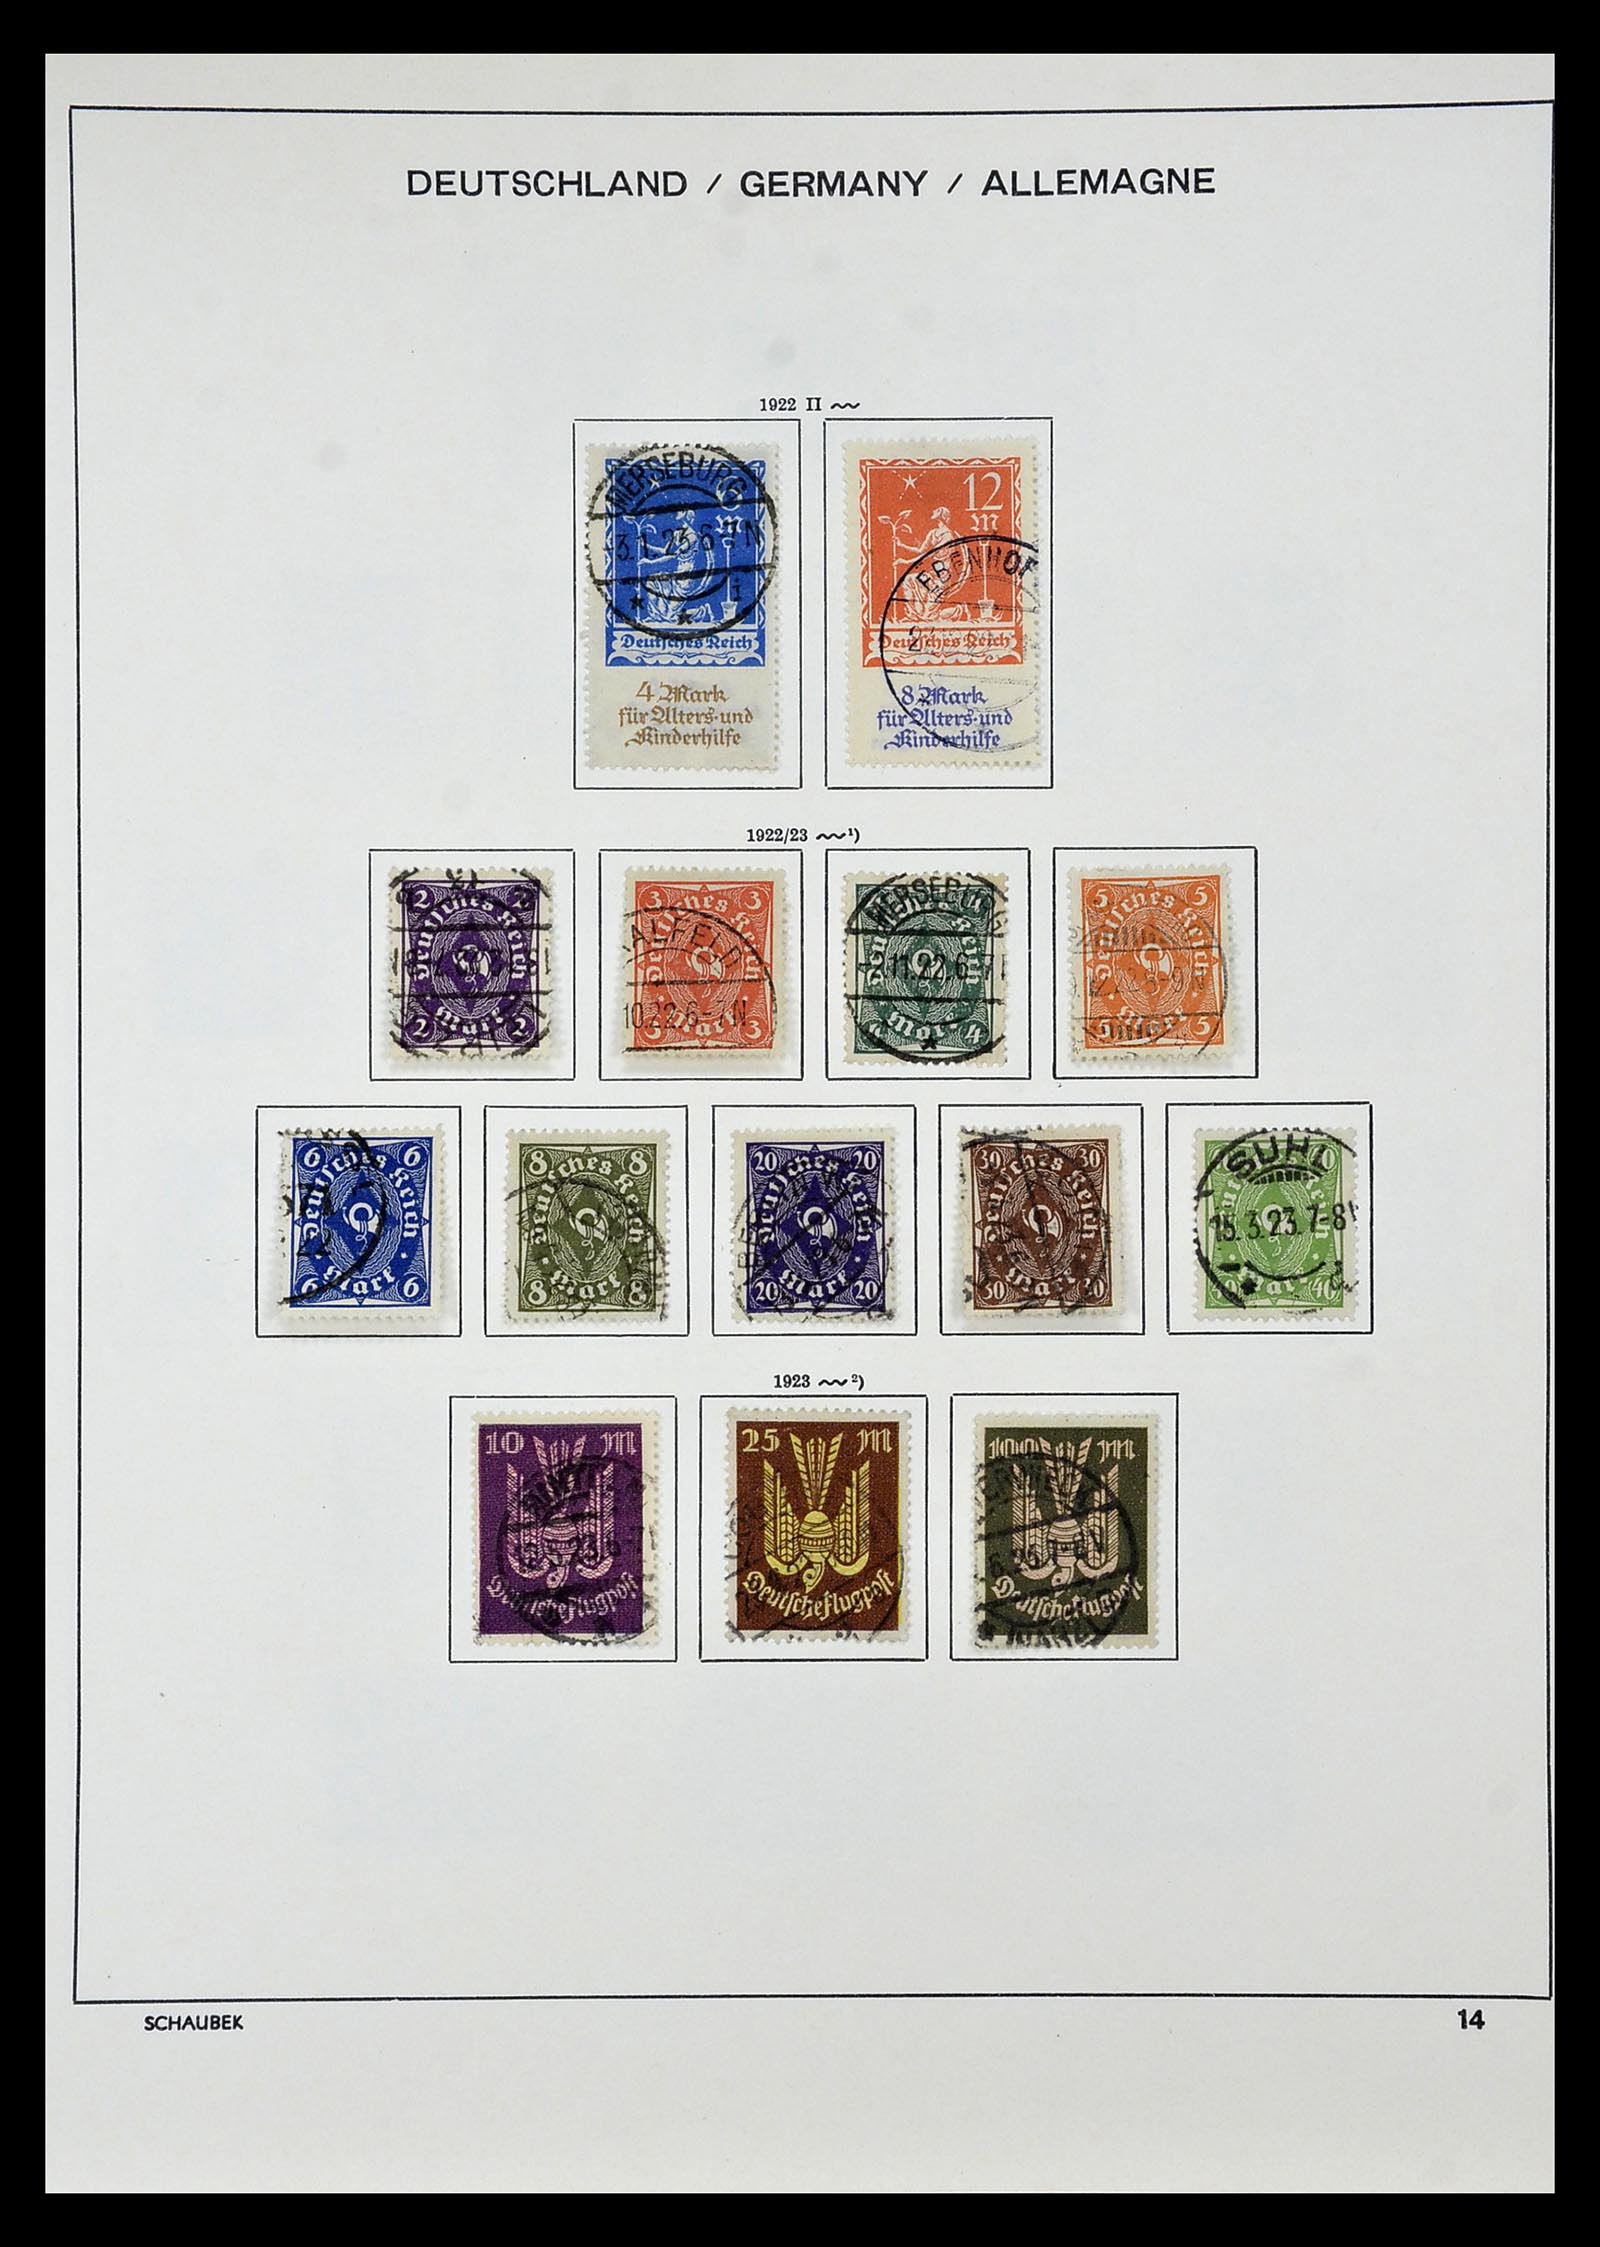 35006 008 - Stamp Collection 35006 German Reich infla 1919-1923.